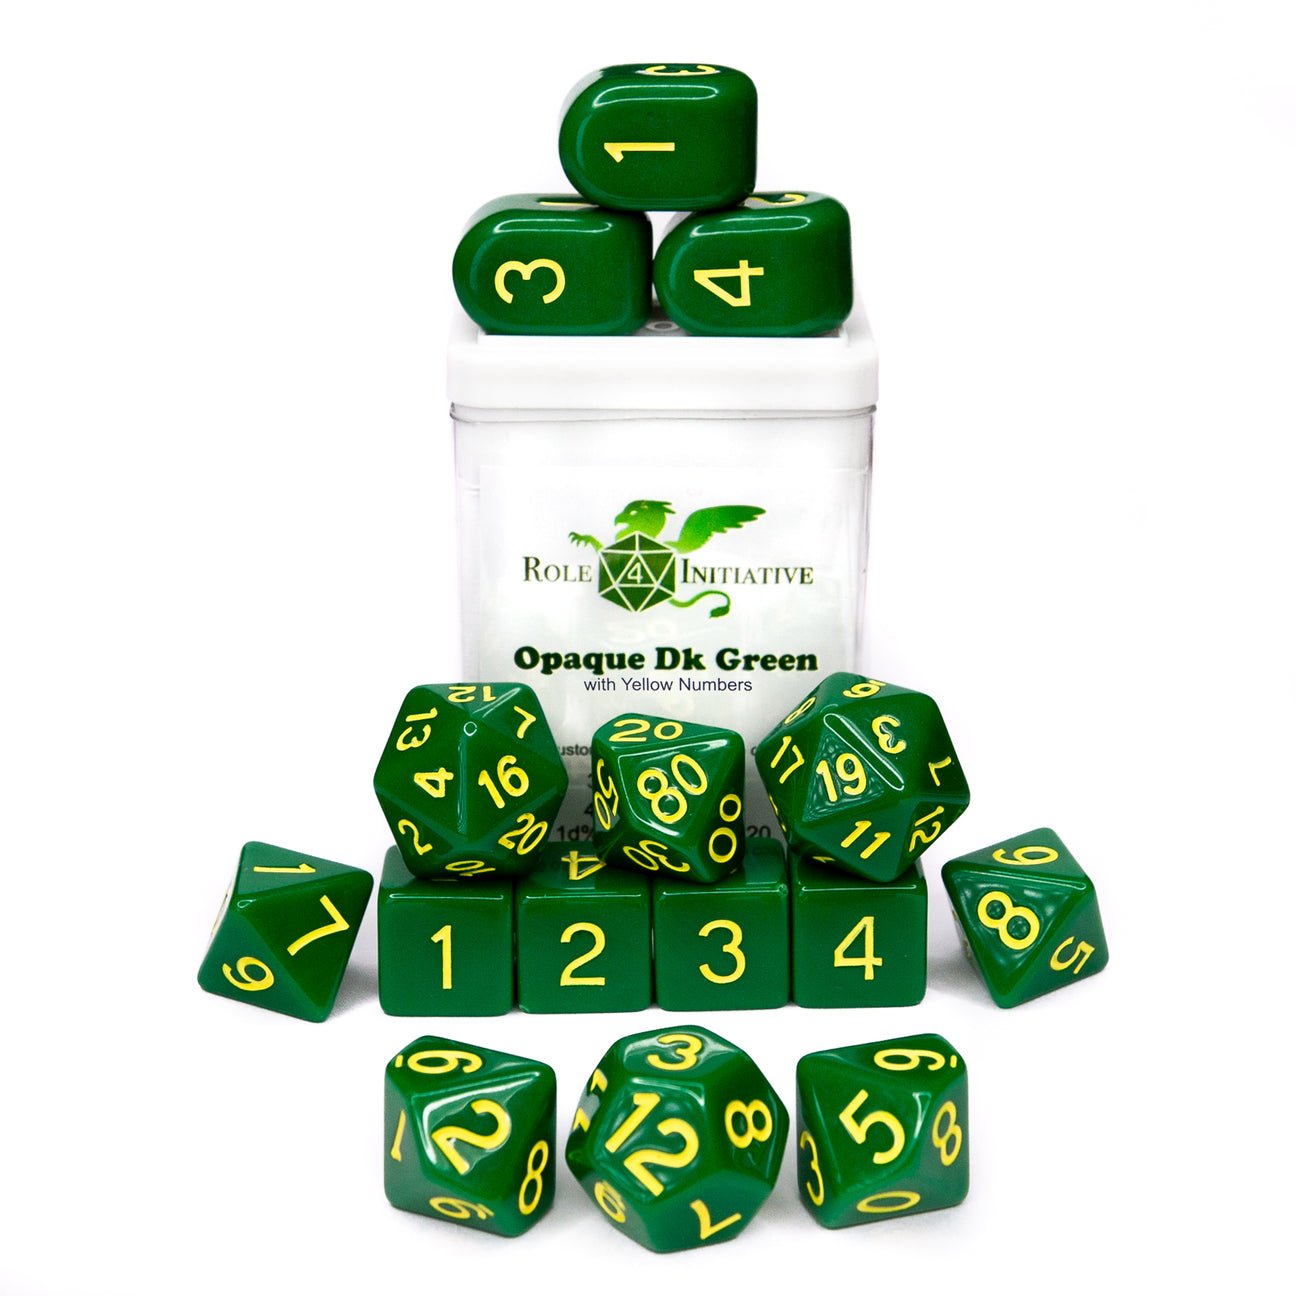 Opaque Dark Green - 15 dice set (with Arch’d4™) - The Fourth Place